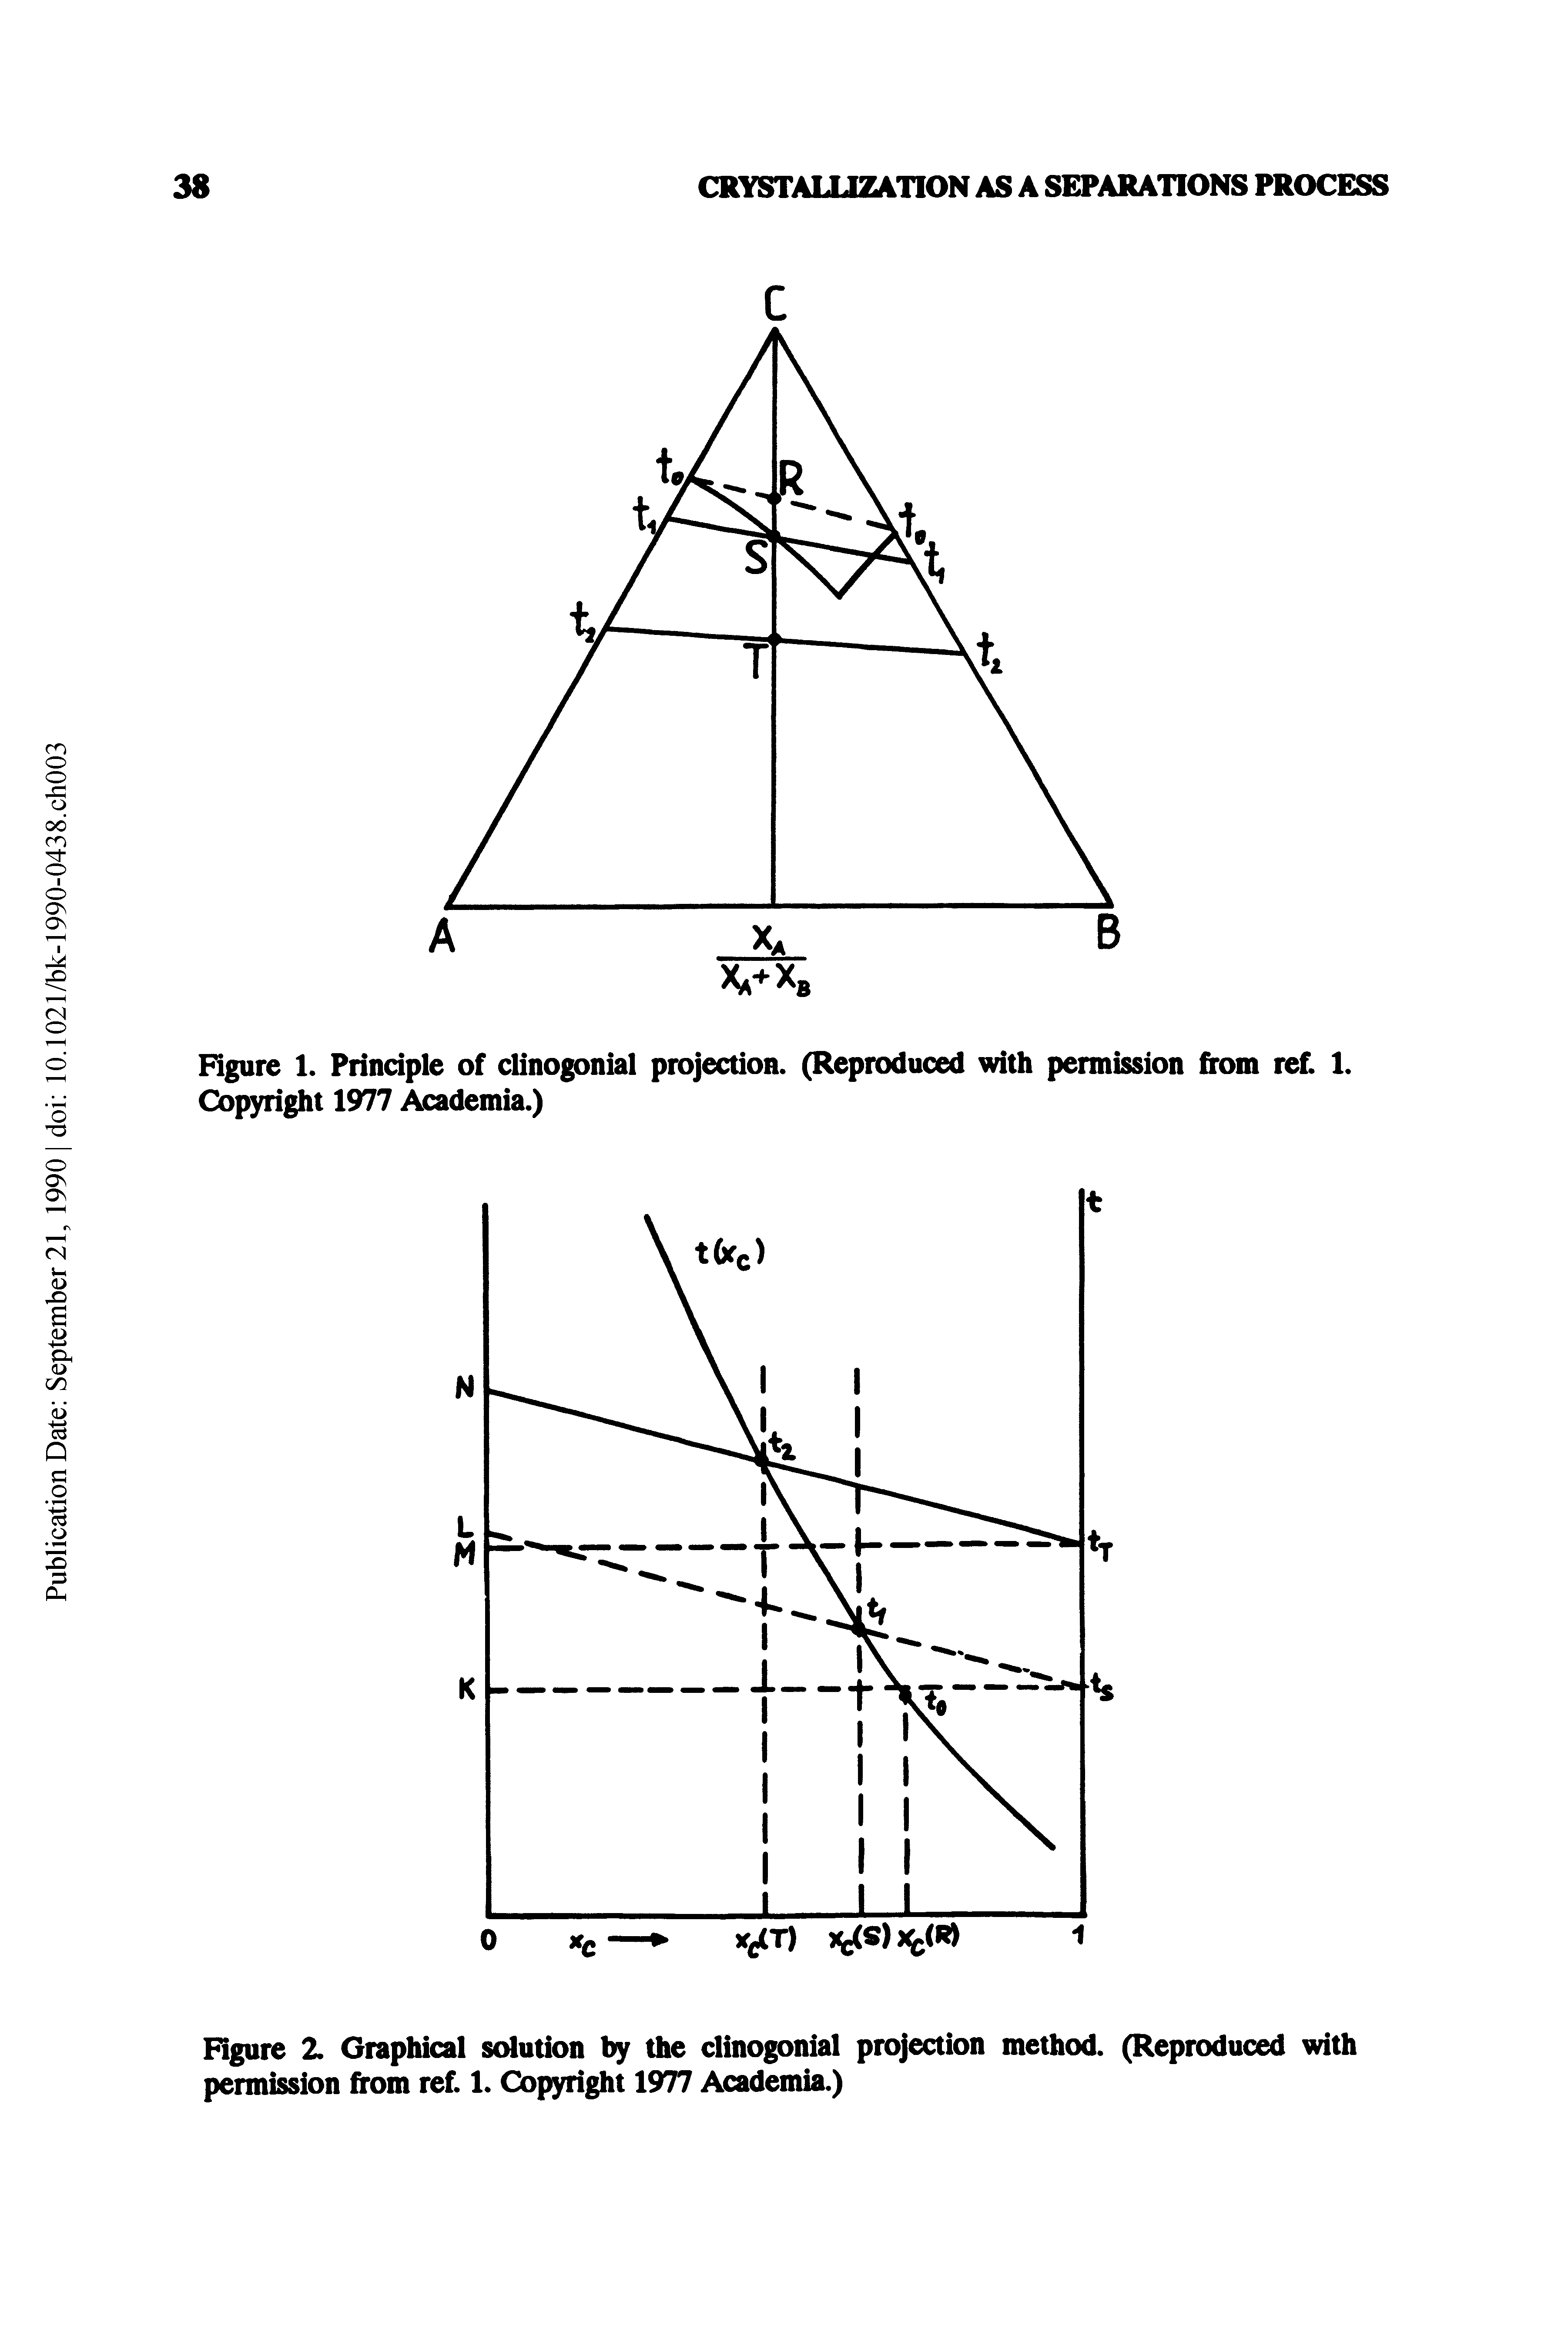 Figure 1. Principle of clinogonial projection. (Reproduced with permission from ret 1. Copyright 1977 Academia.)...